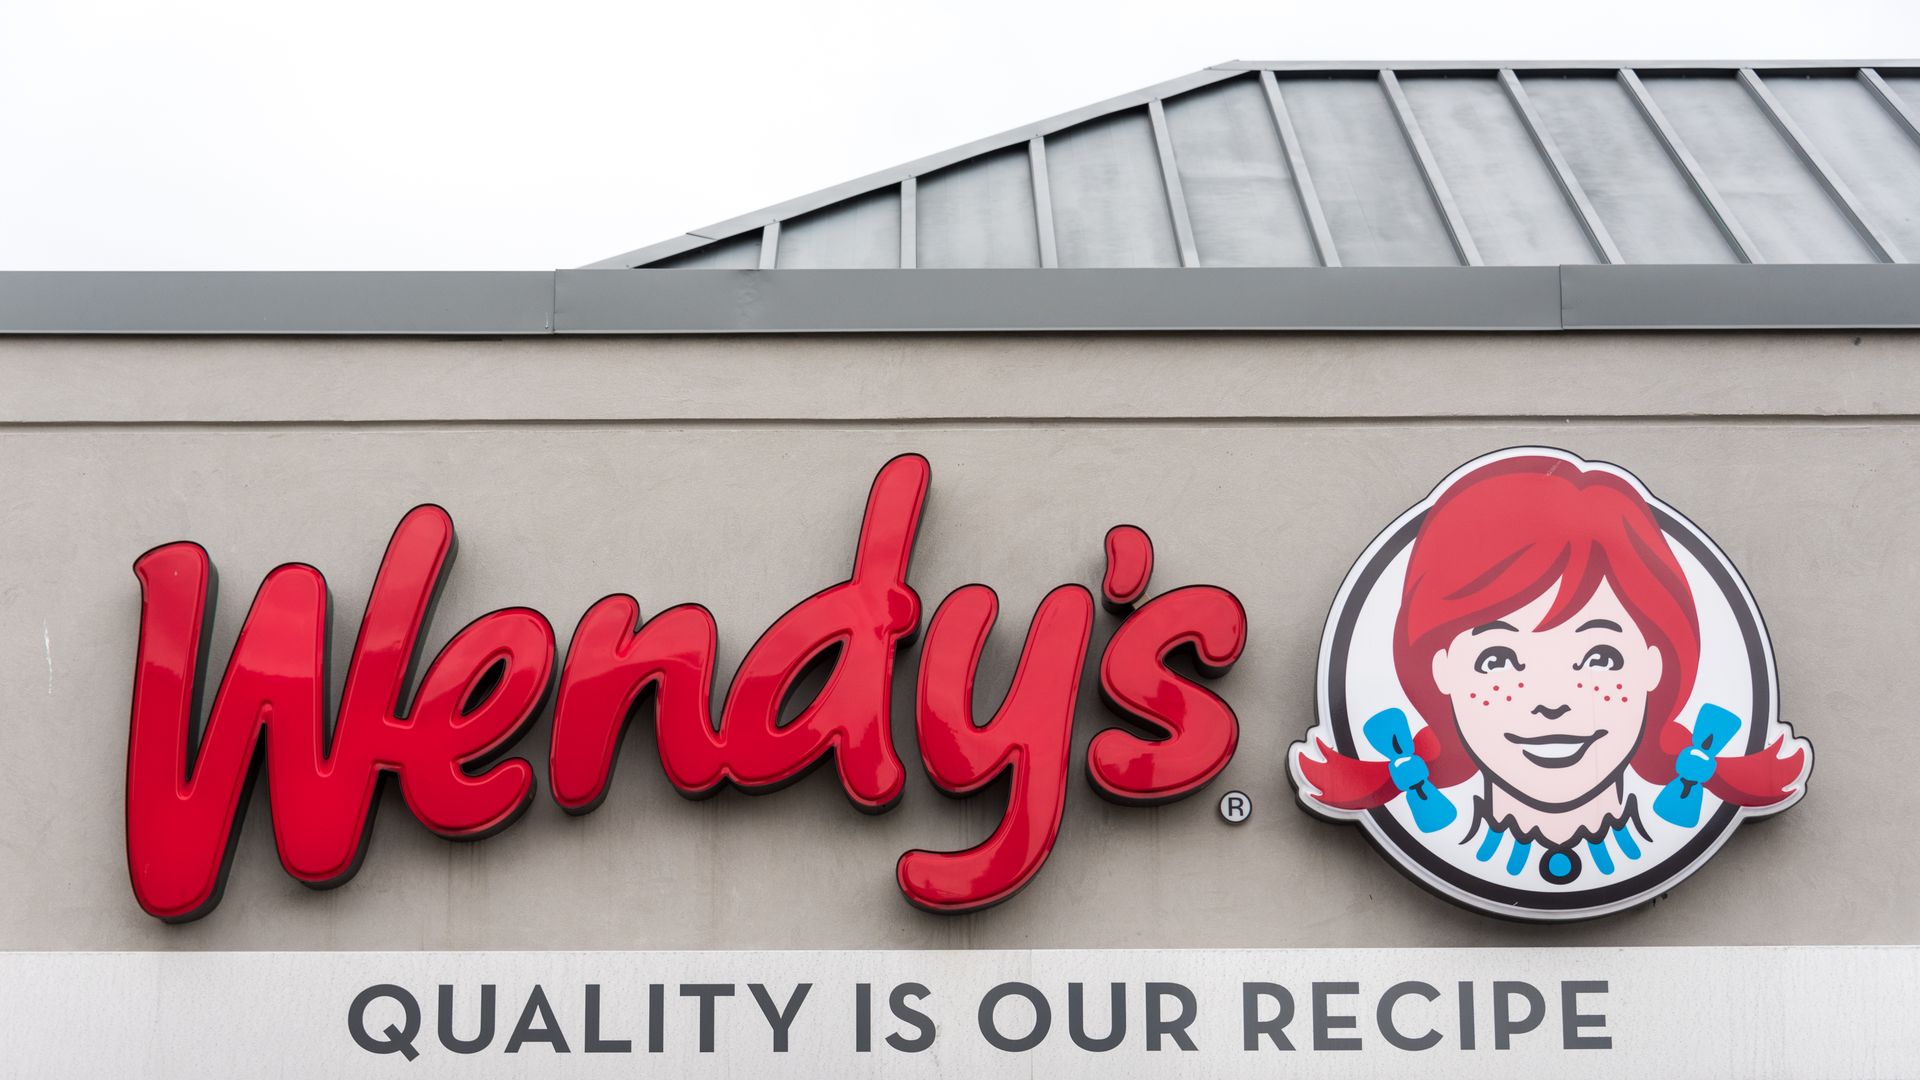 A Wendy's restaurant sign reading "Quality is our recipe."